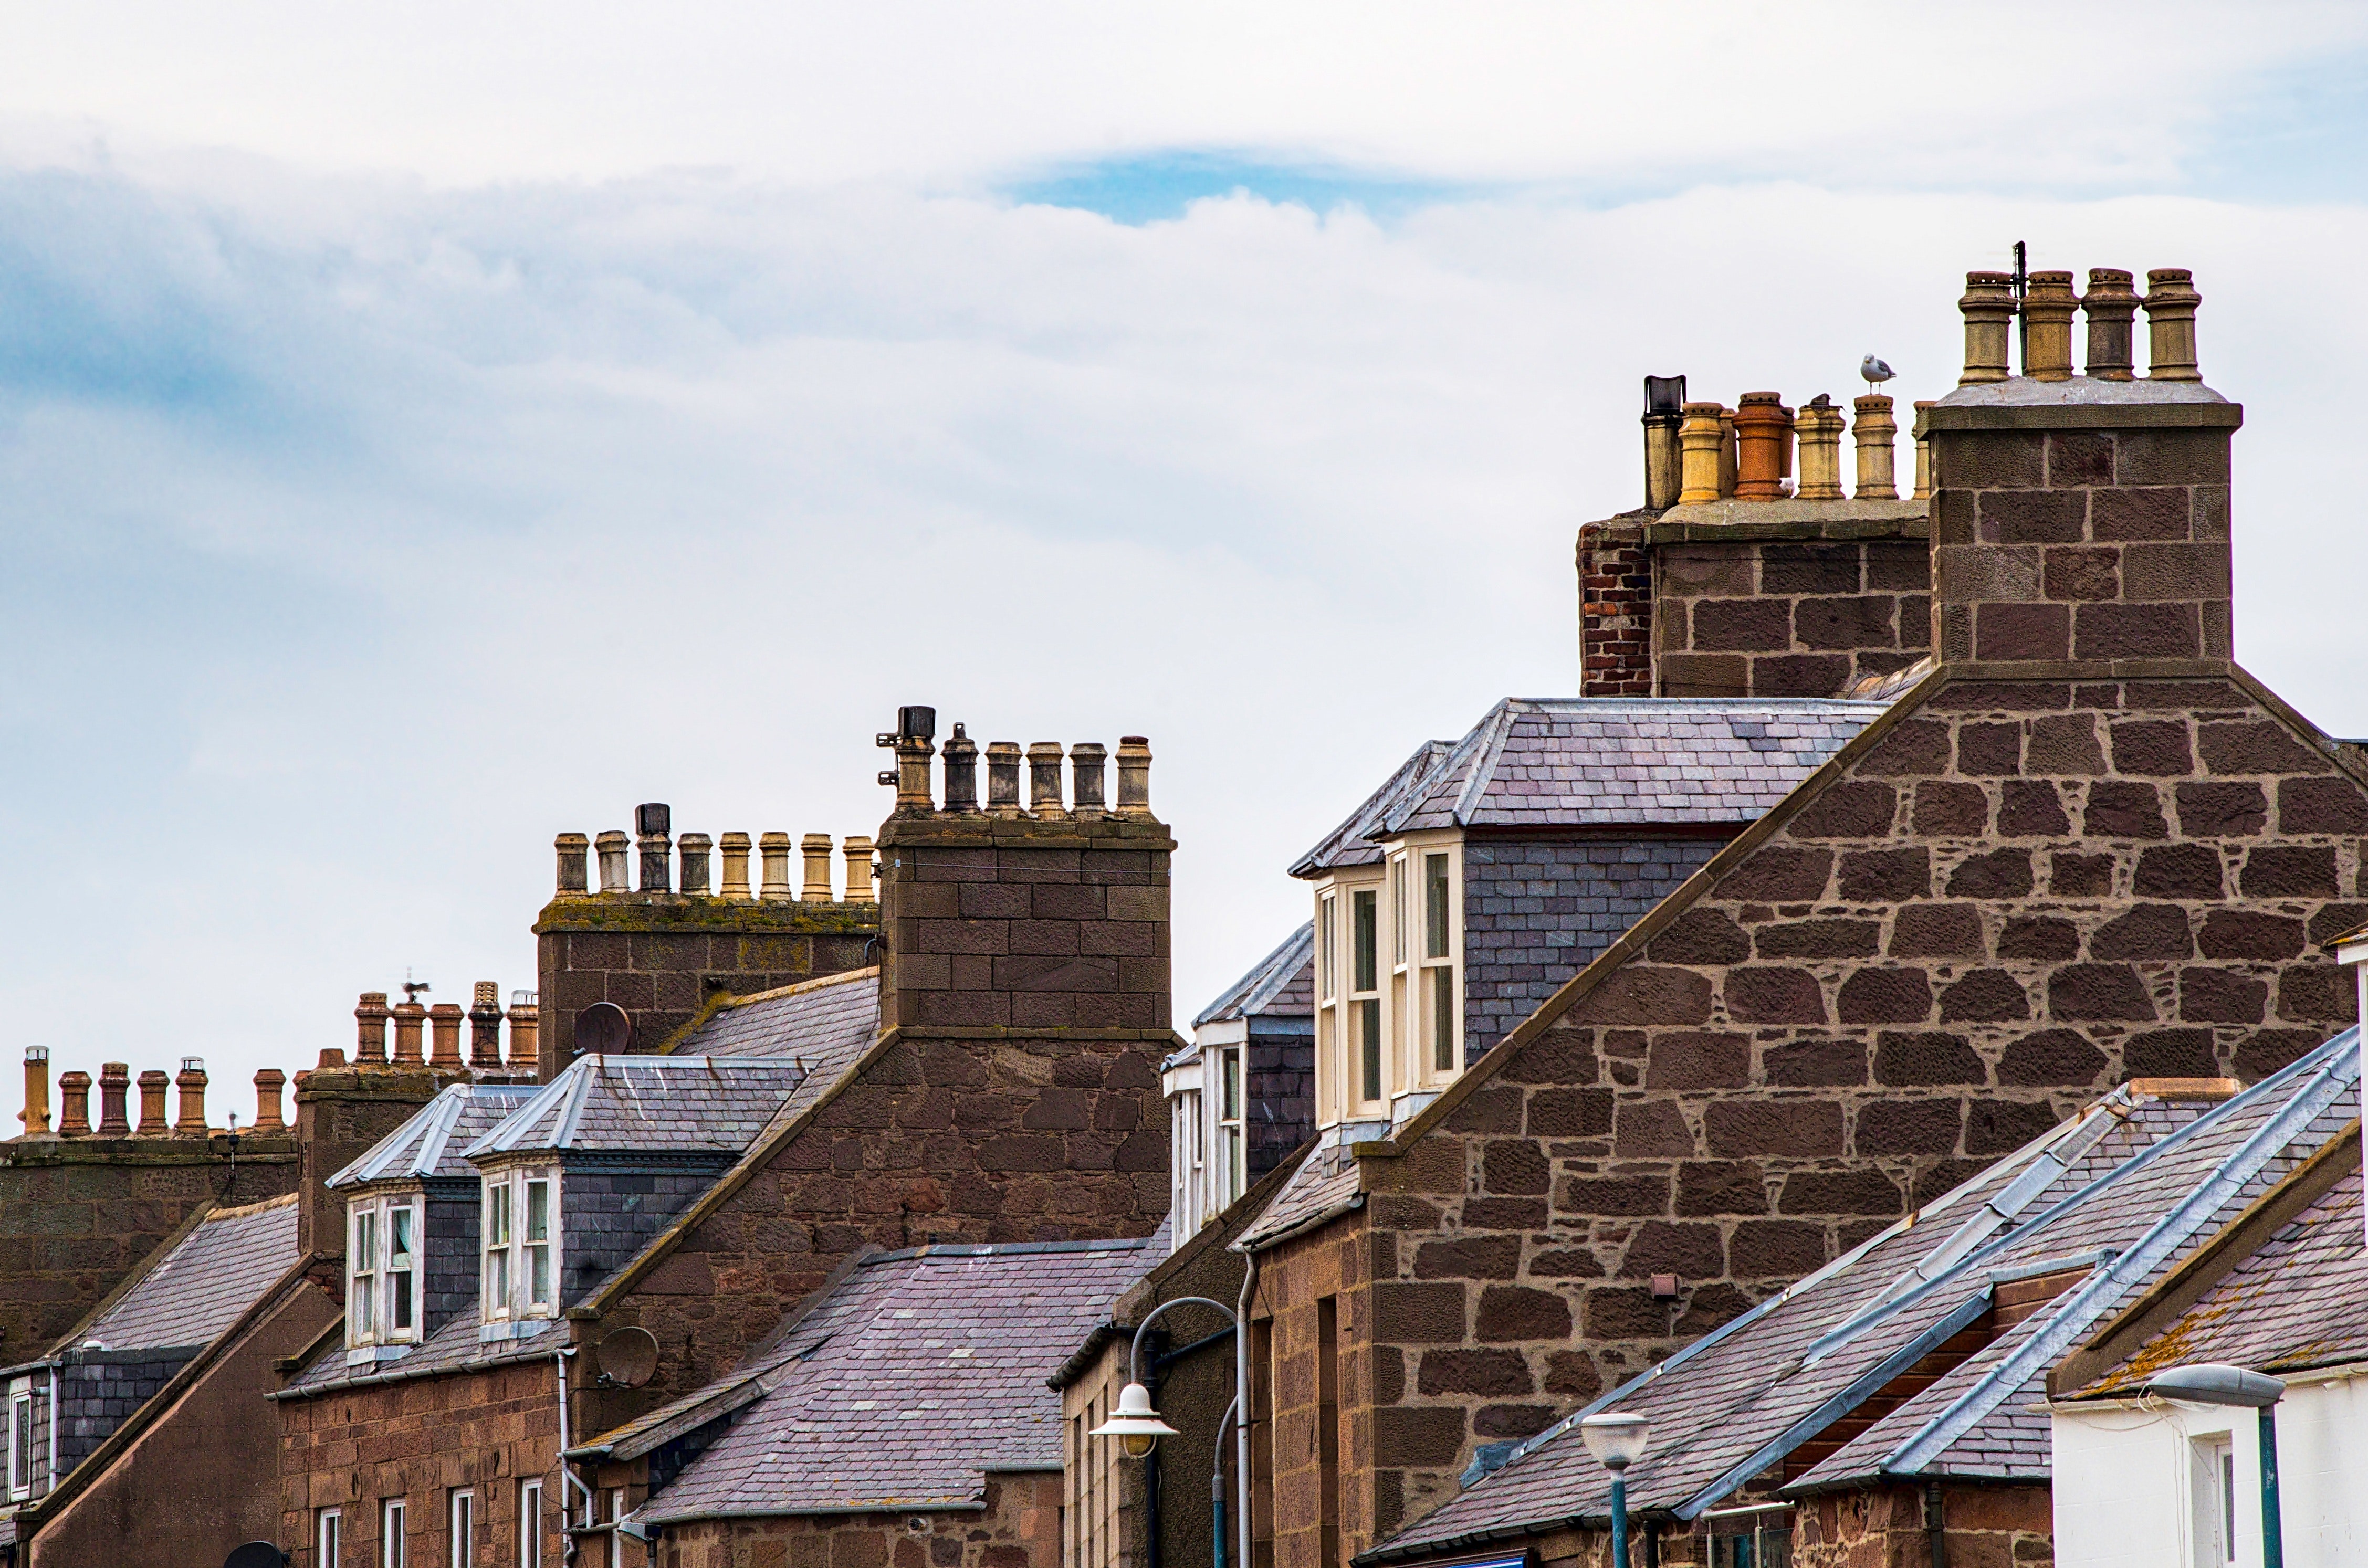 Row of houses with chimneys in Devon location